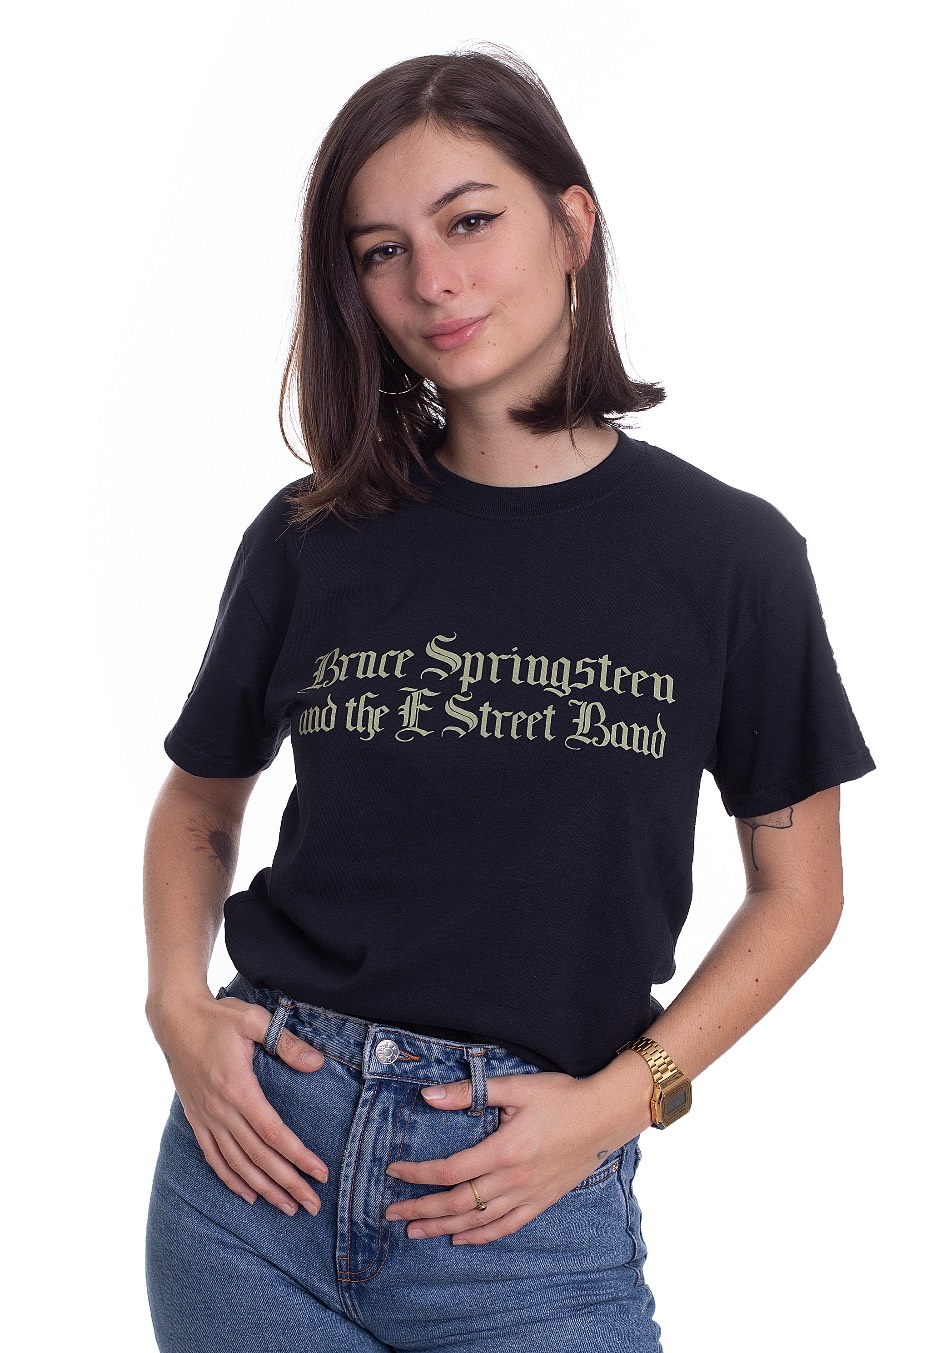 Bruce Springsteen - Black Motorcycle Guitars - - T-Shirts